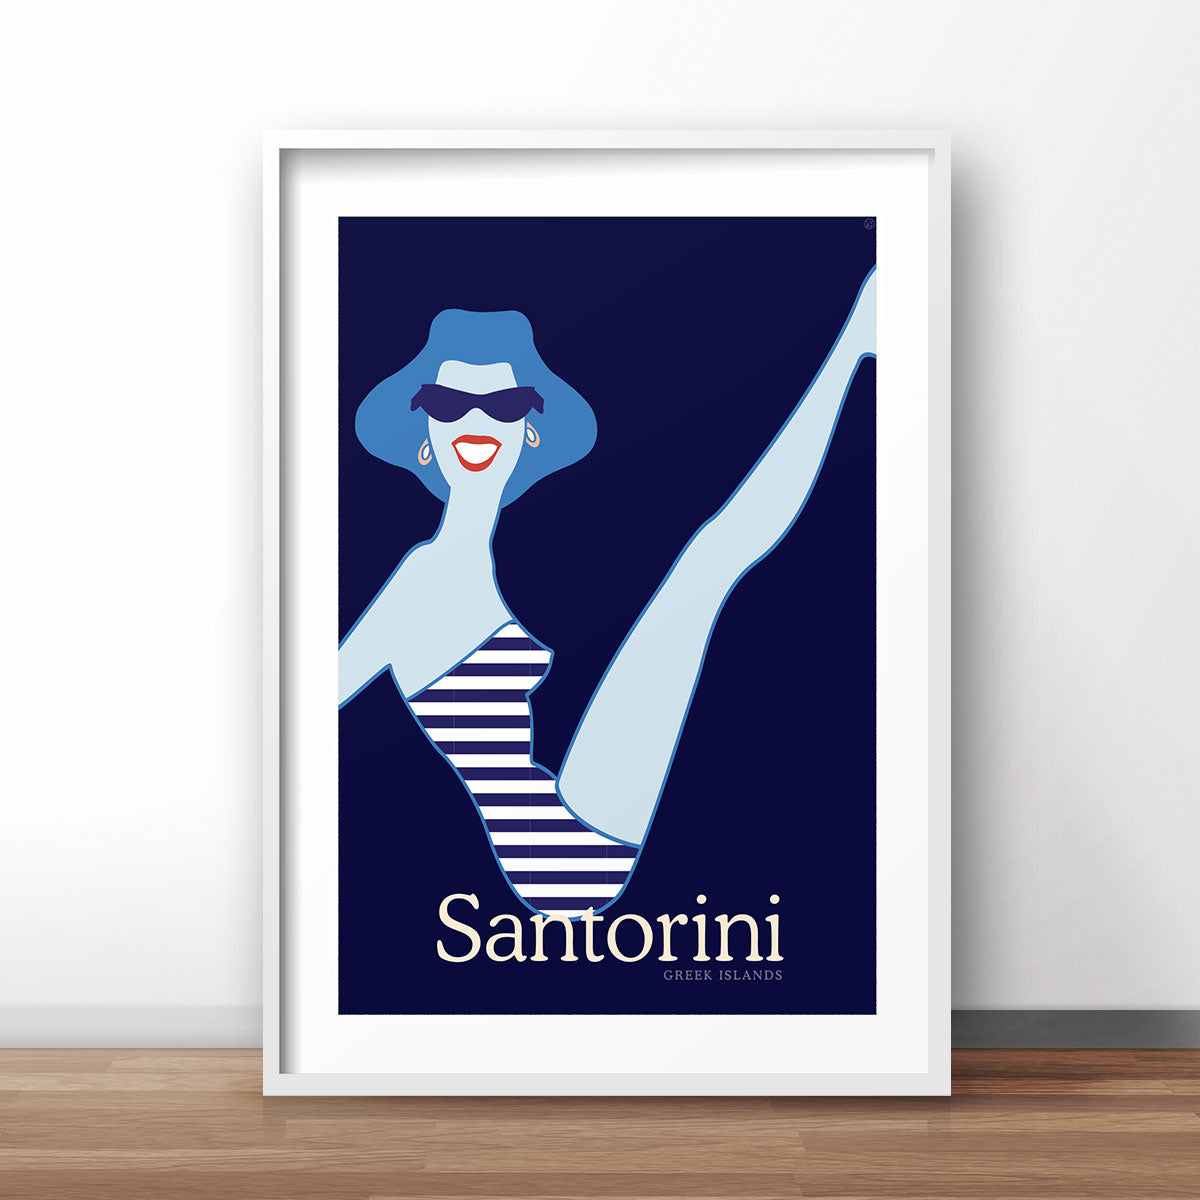 Santorini retro vintage beach gal poster print from Places We Luv